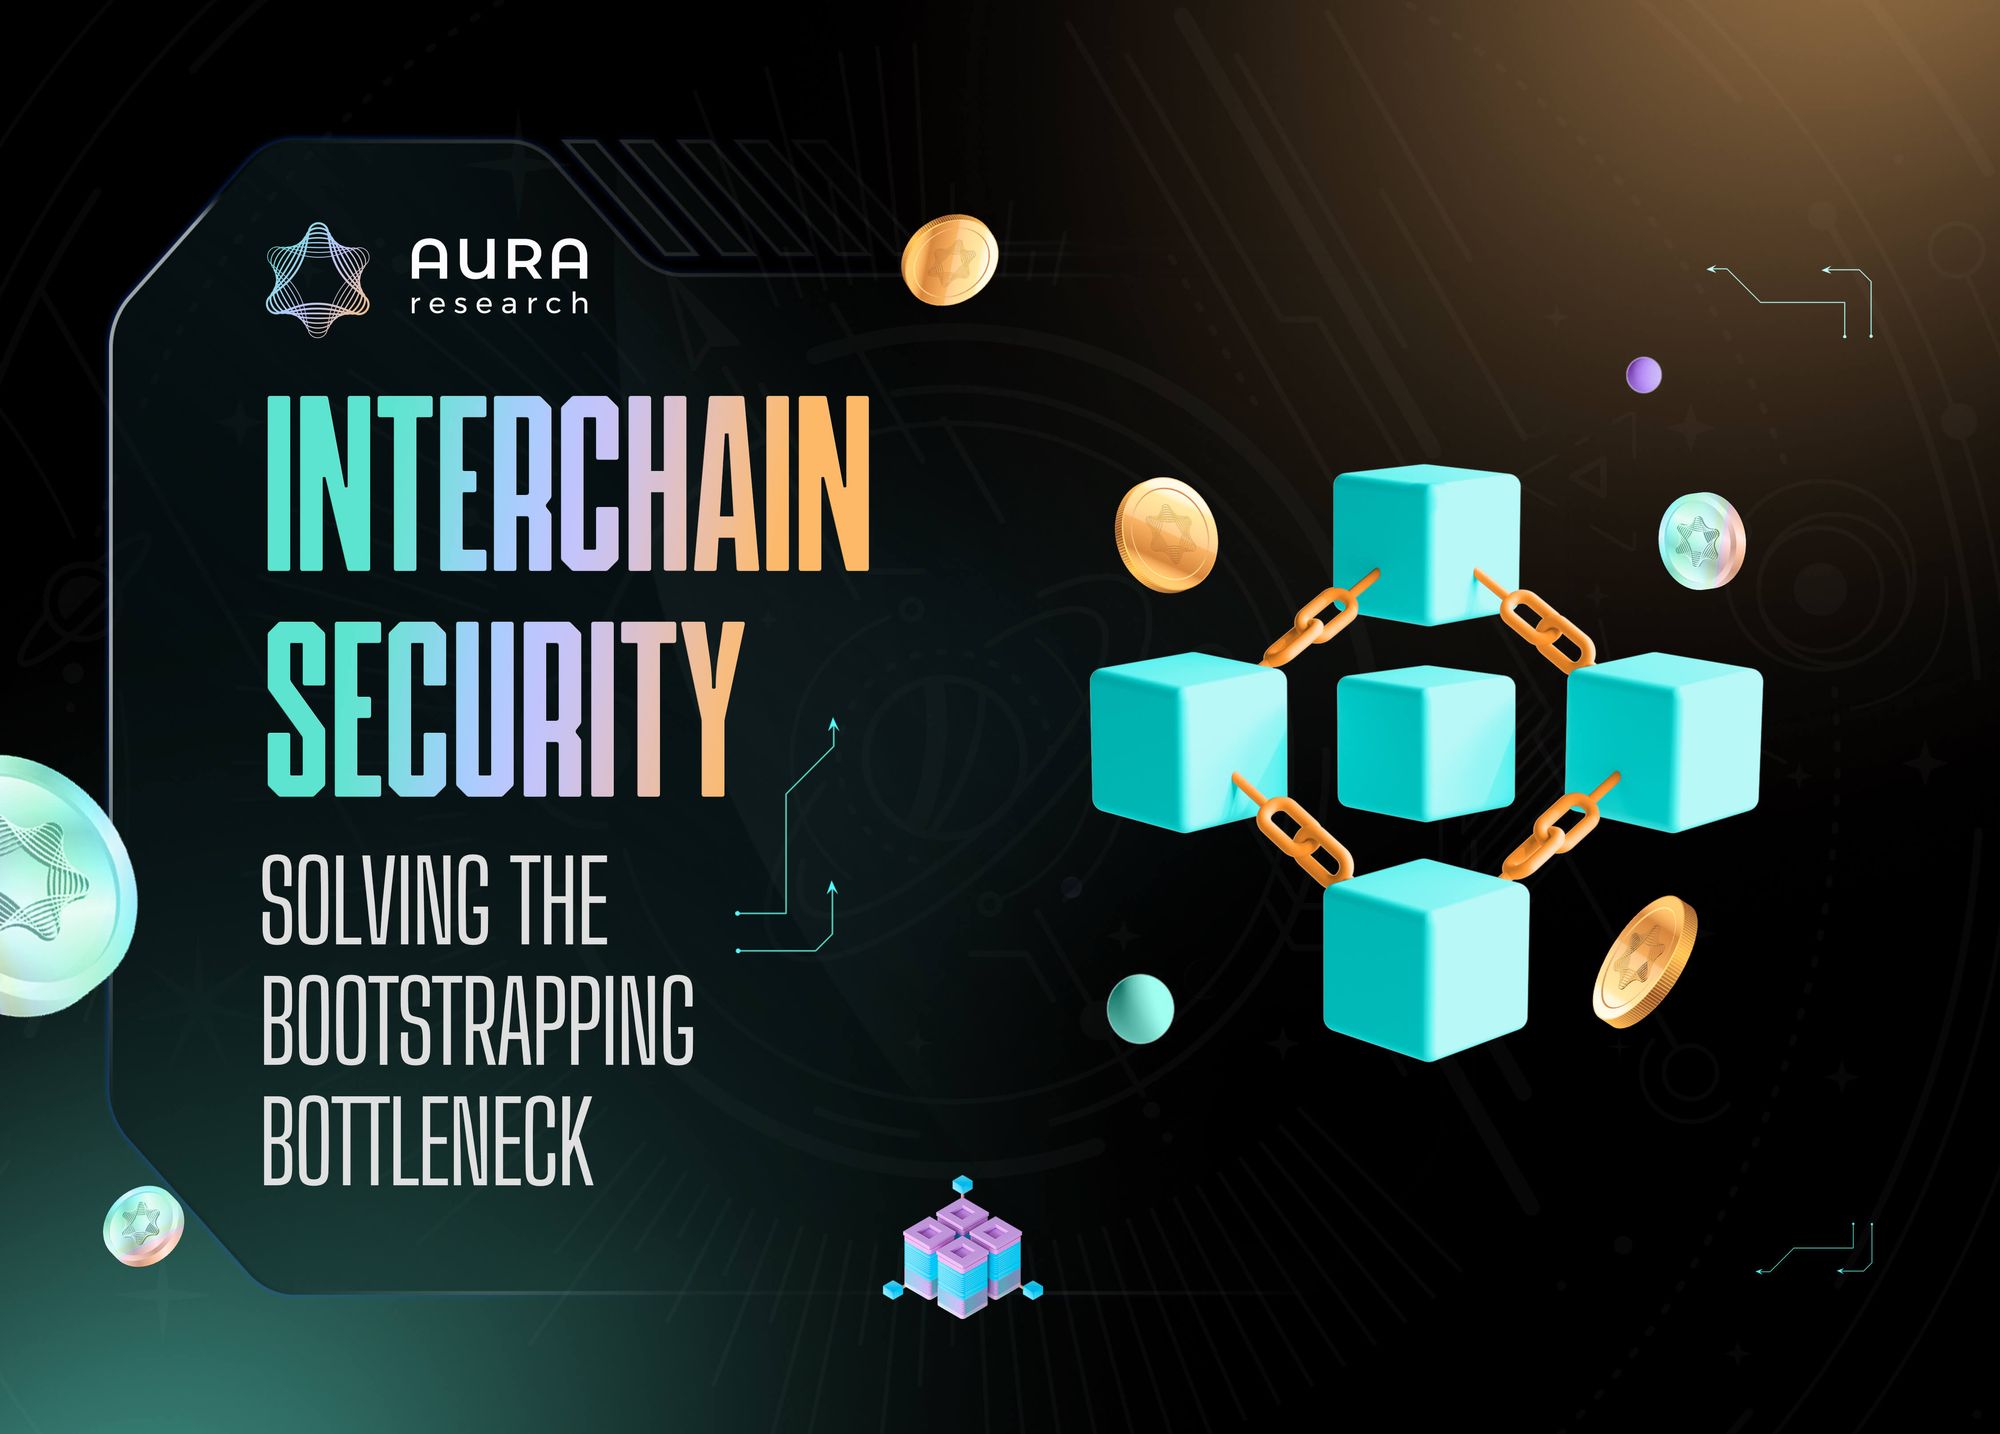 Interchain Security: Solving the Bootstrapping Bottleneck